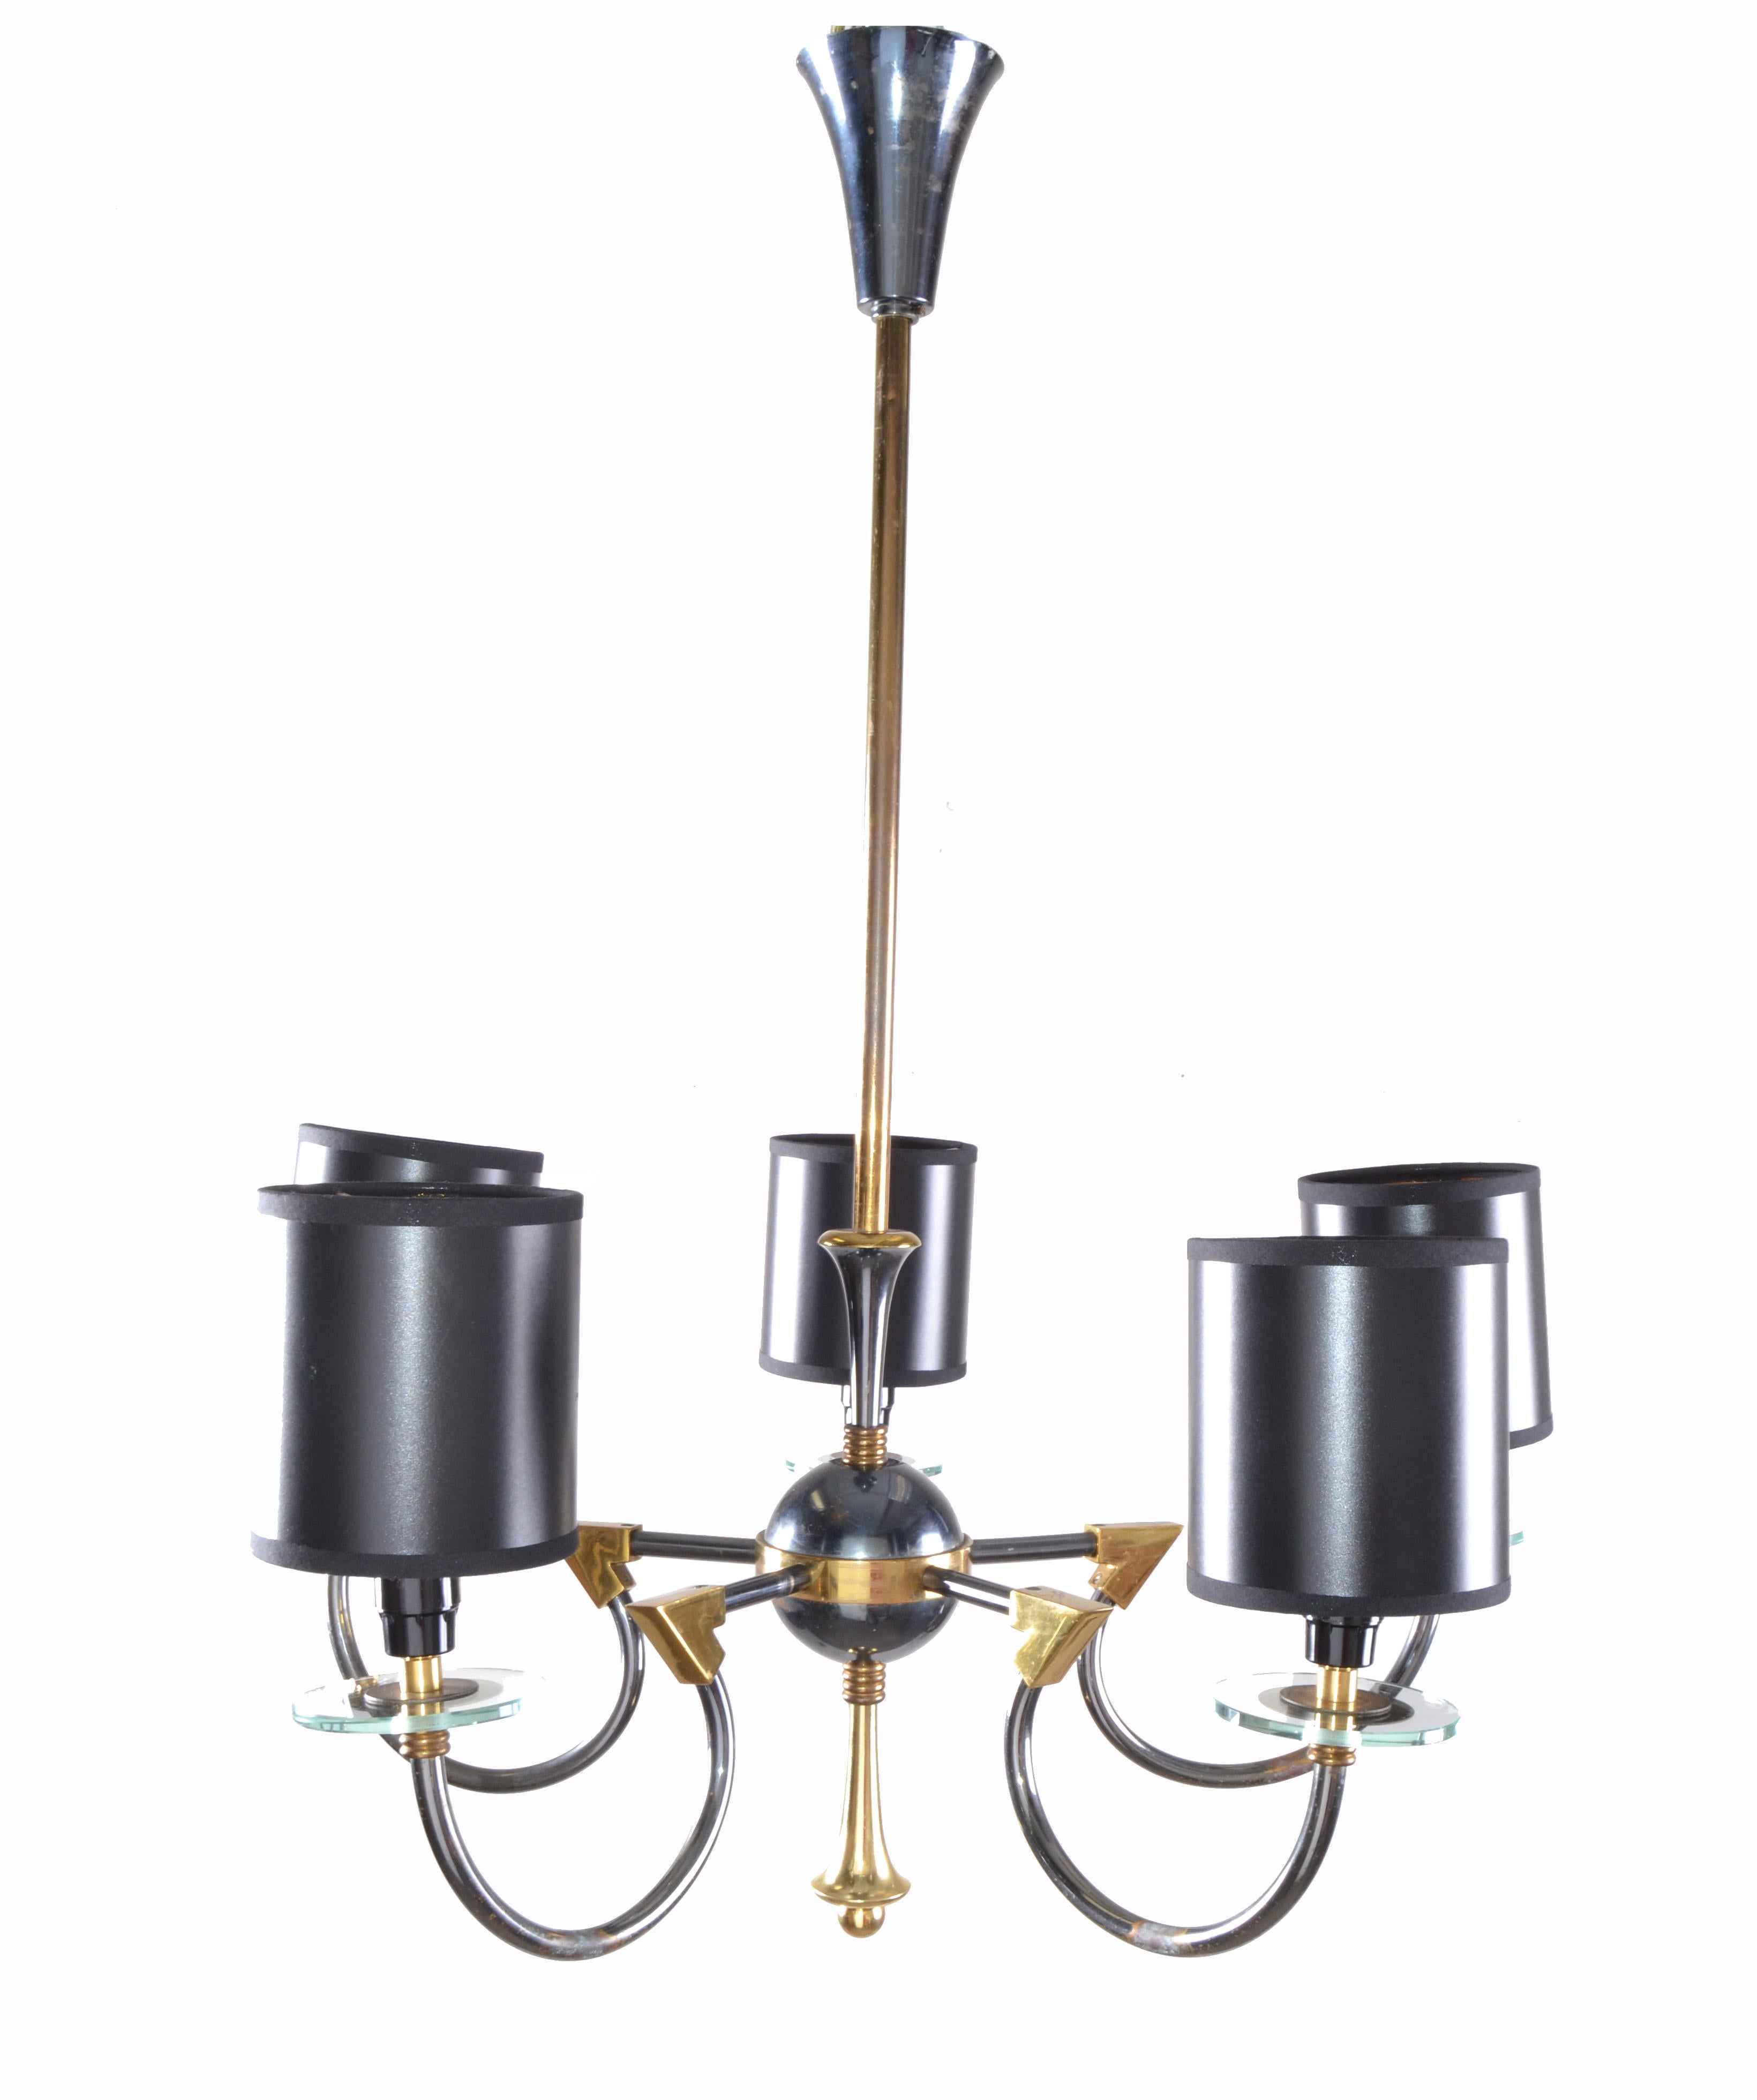 One of two Maison Jansen chandelier with two-tone metal finish, in a patina bronze and a dark gunmetal color.
Glass accents with clear glass round saucers on all pieces just under the sockets.
Sold with black shades: 4.38 inches H, 4 inches